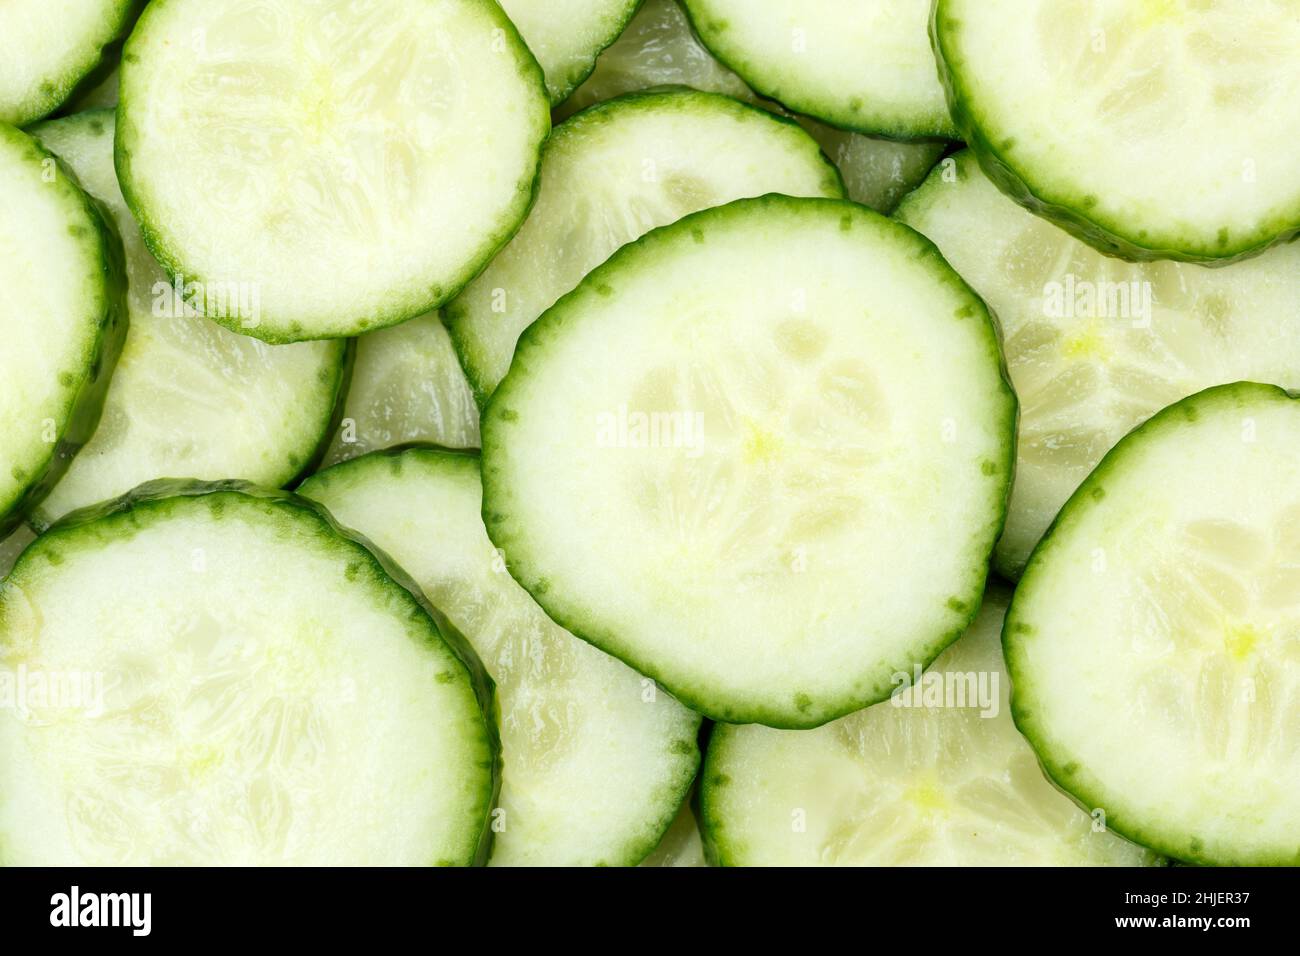 Cucumber cucumbers background vegetable vegetables from above fresh Stock Photo